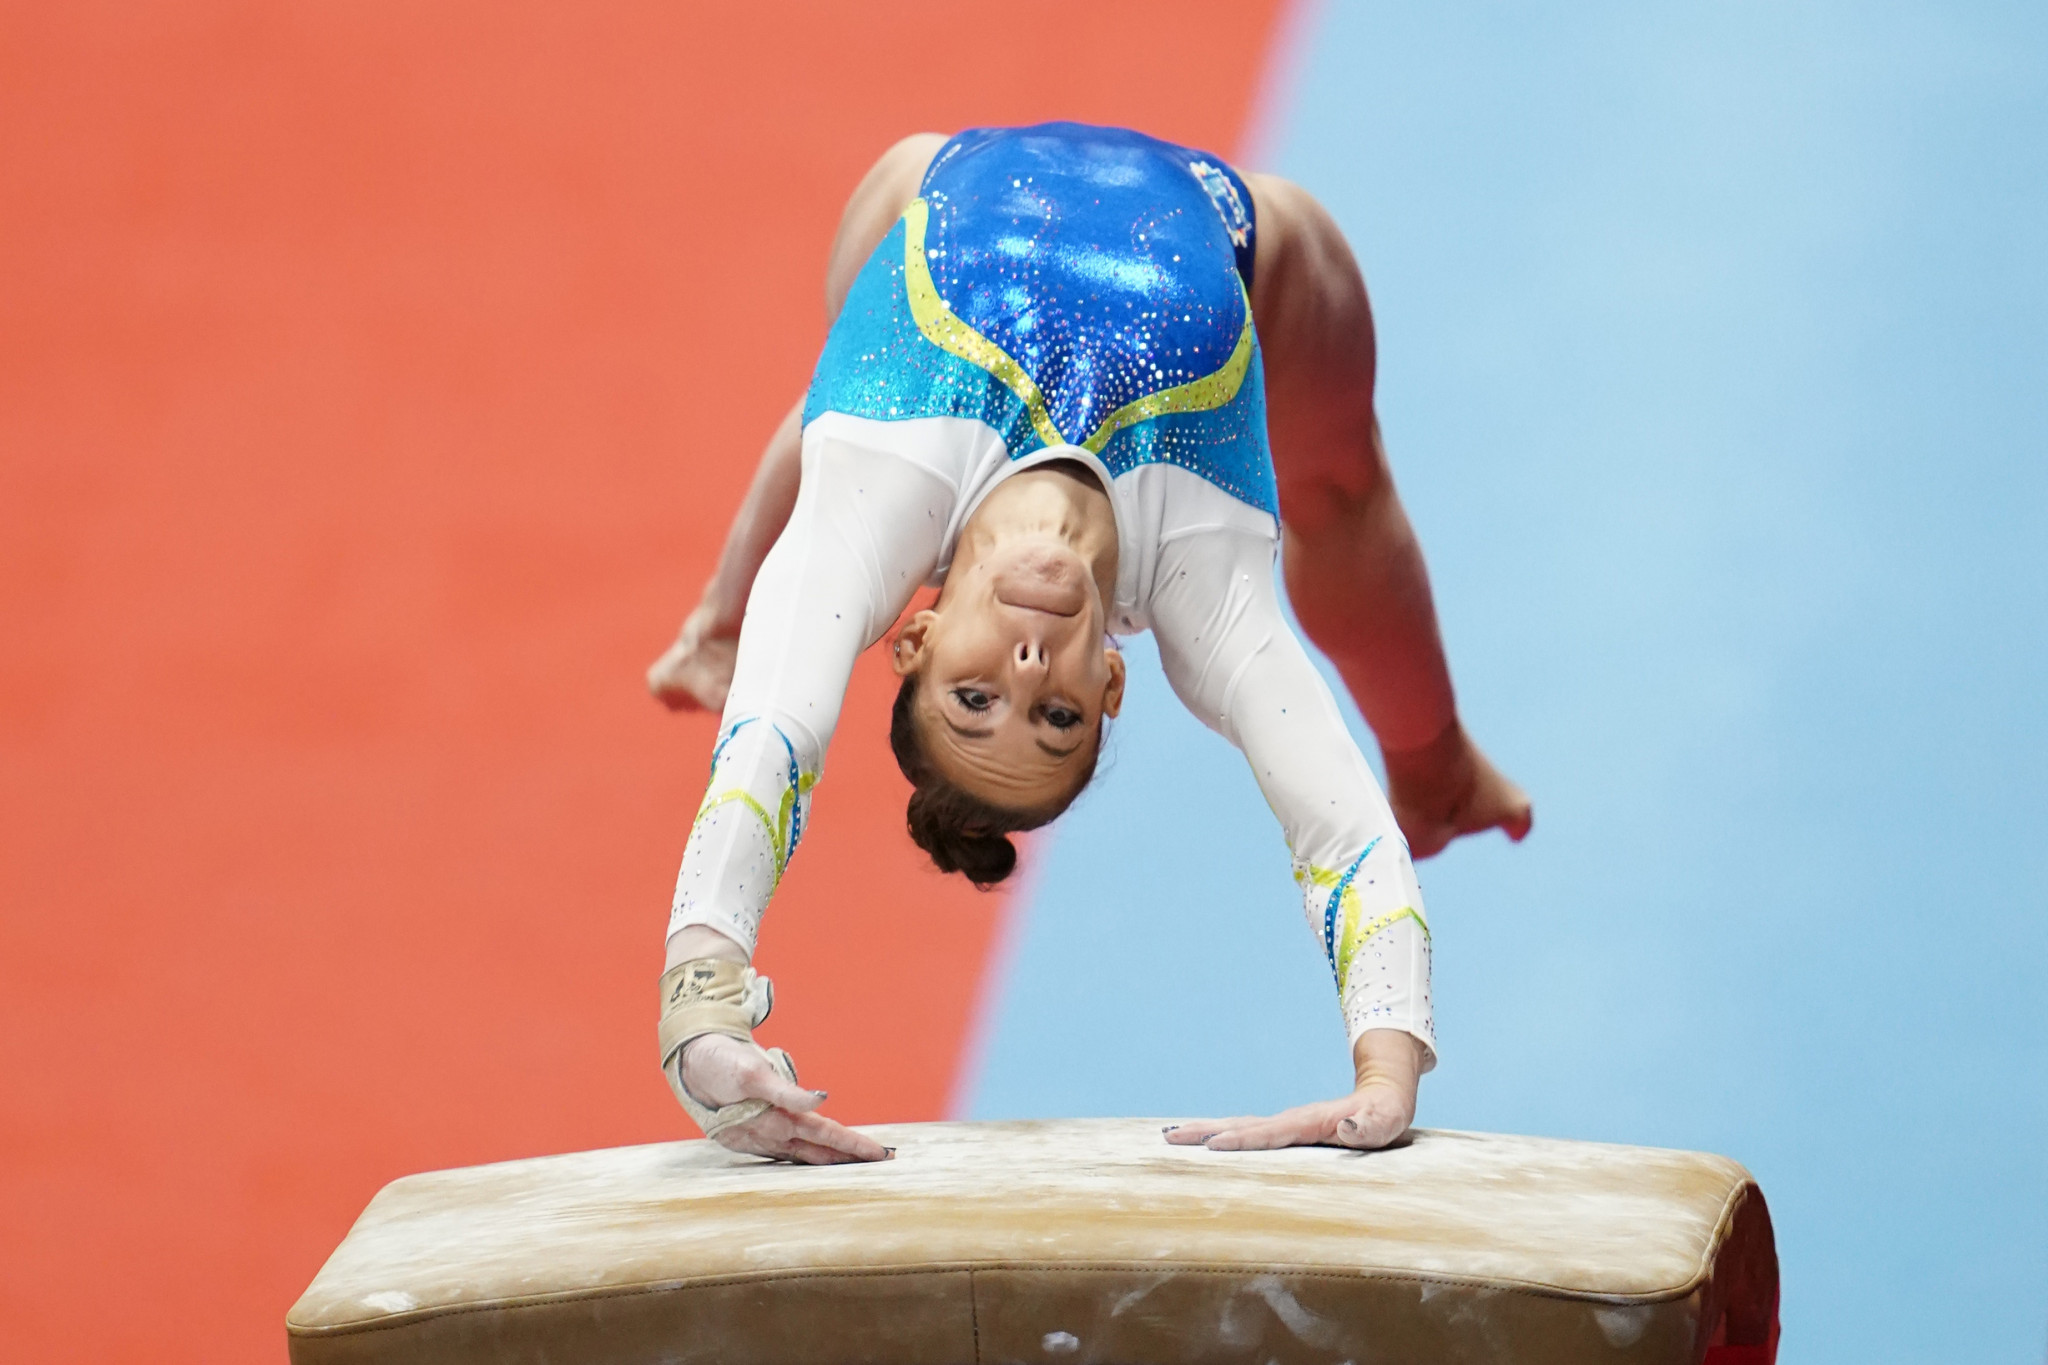 Tjasa Kysselef is tipped for vault success in Baku ©Getty Images